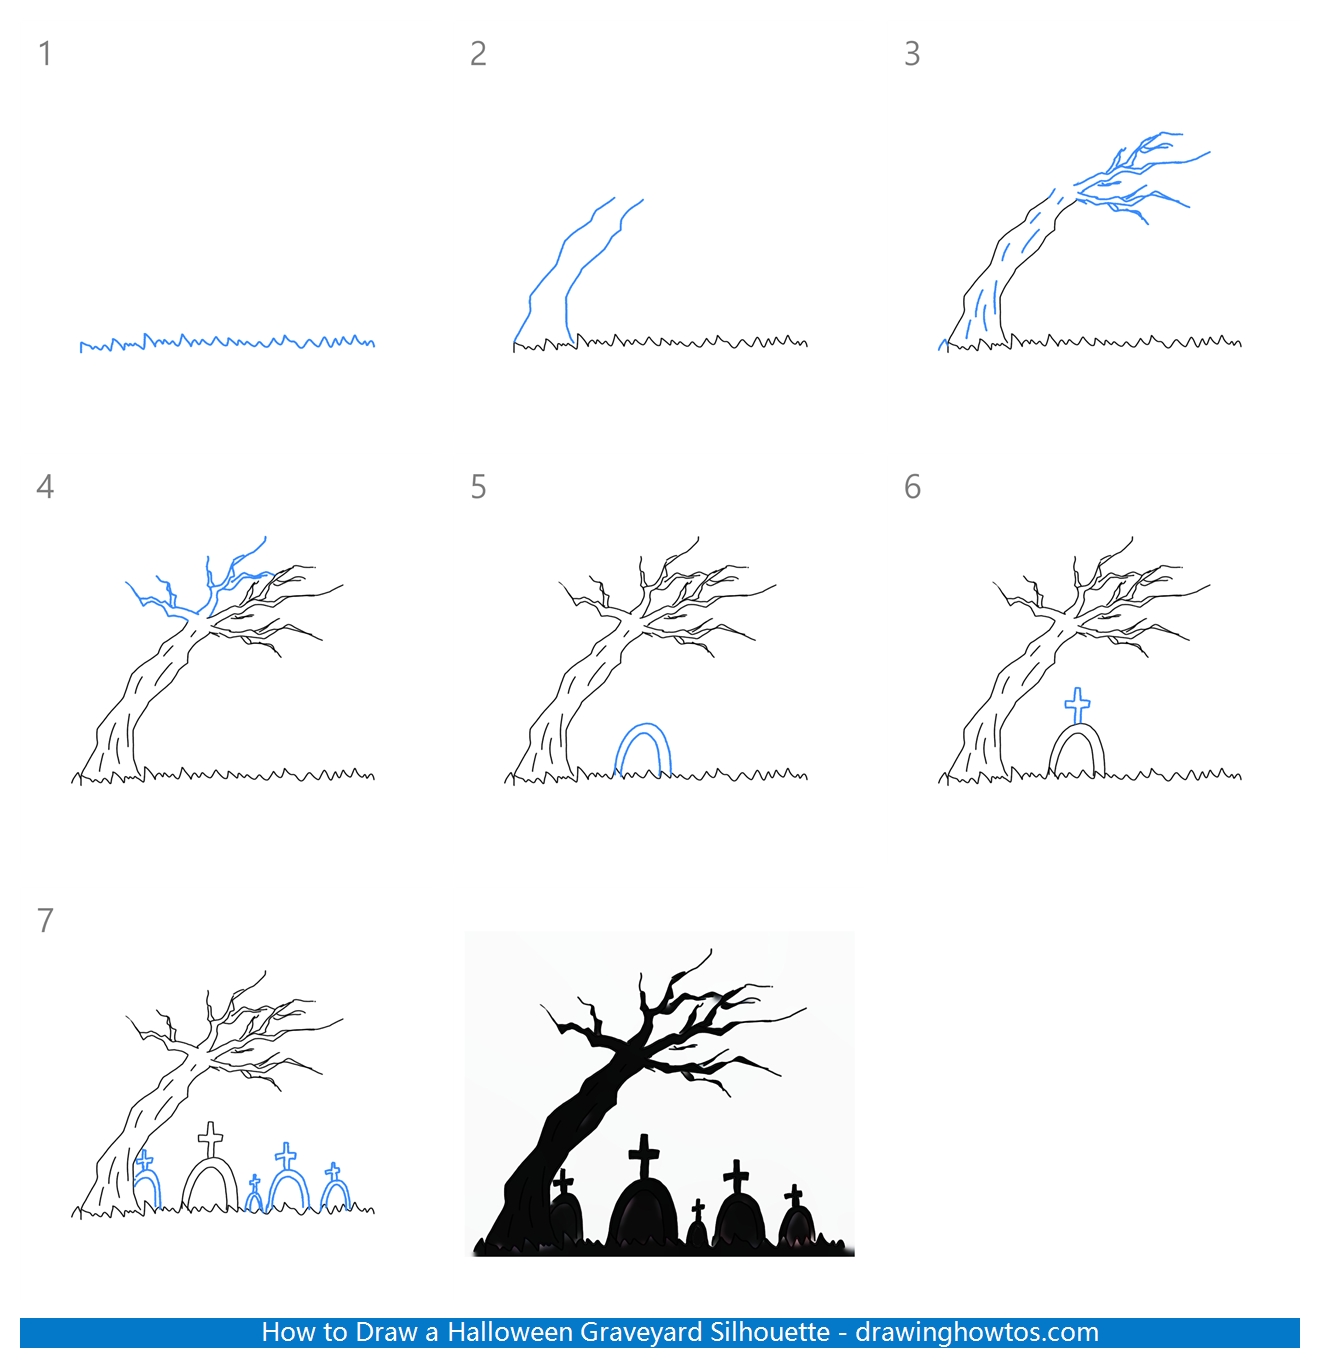 How to Draw a Halloween Graveyard Silhouette Step by Step